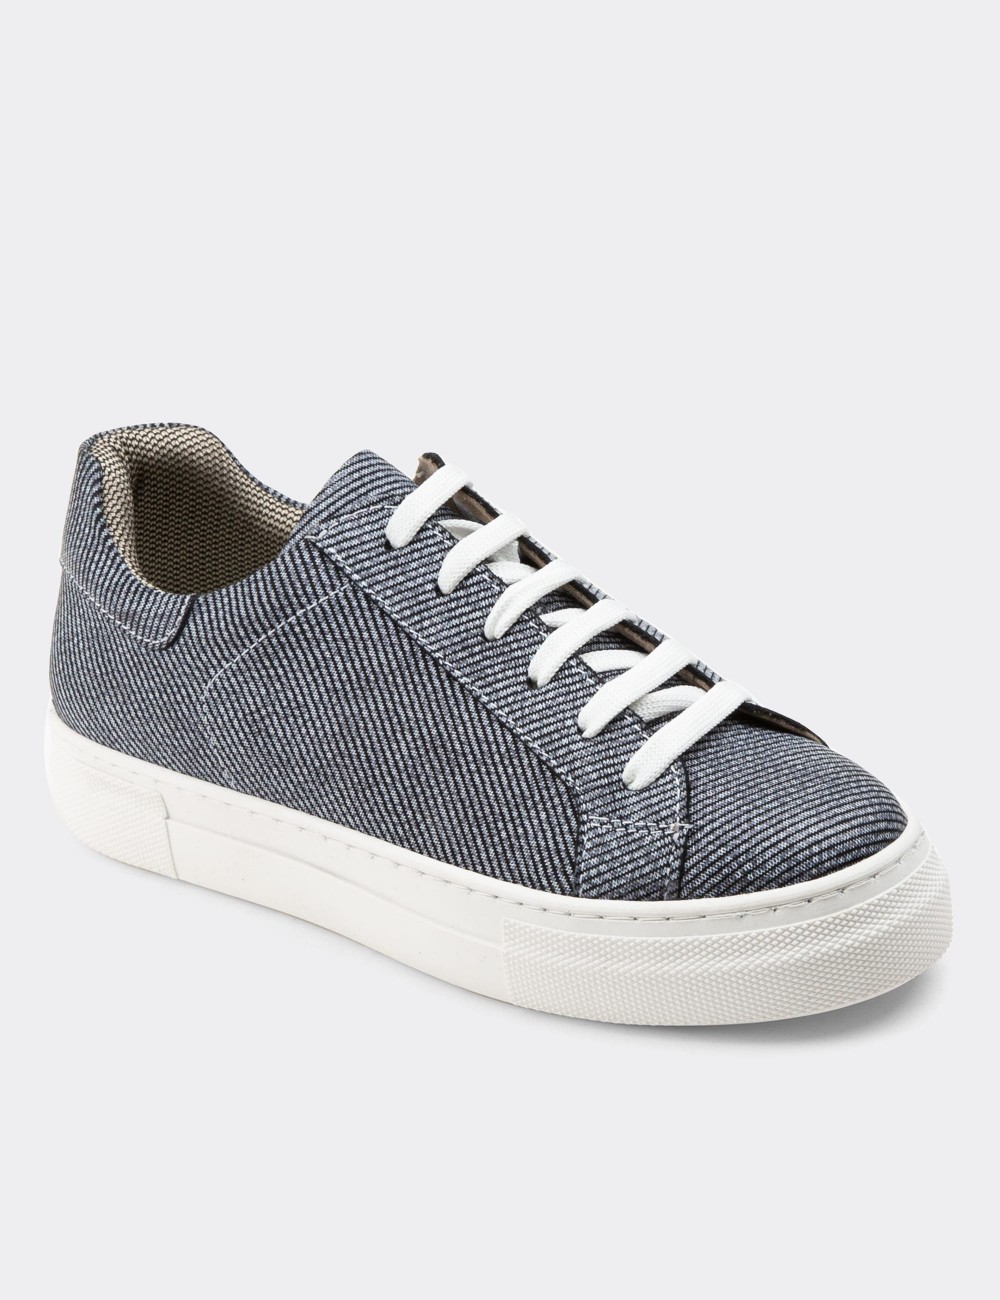 Blue Suede Leather Sneakers - Z1681ZMVIC01